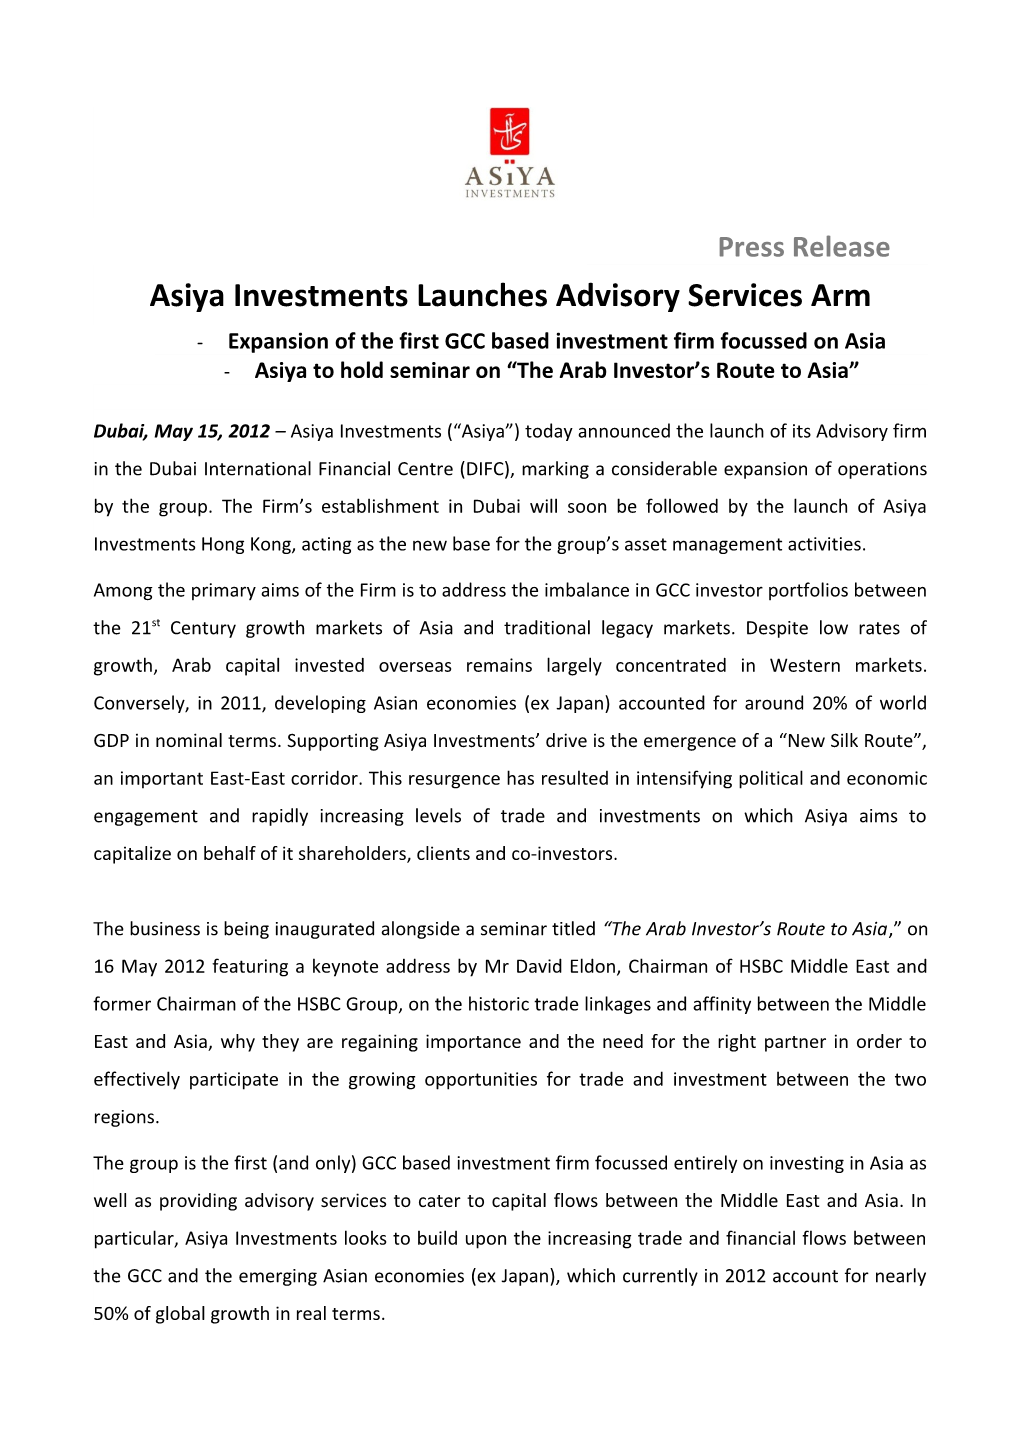 Asiya Investments Launches Advisory Services Arm